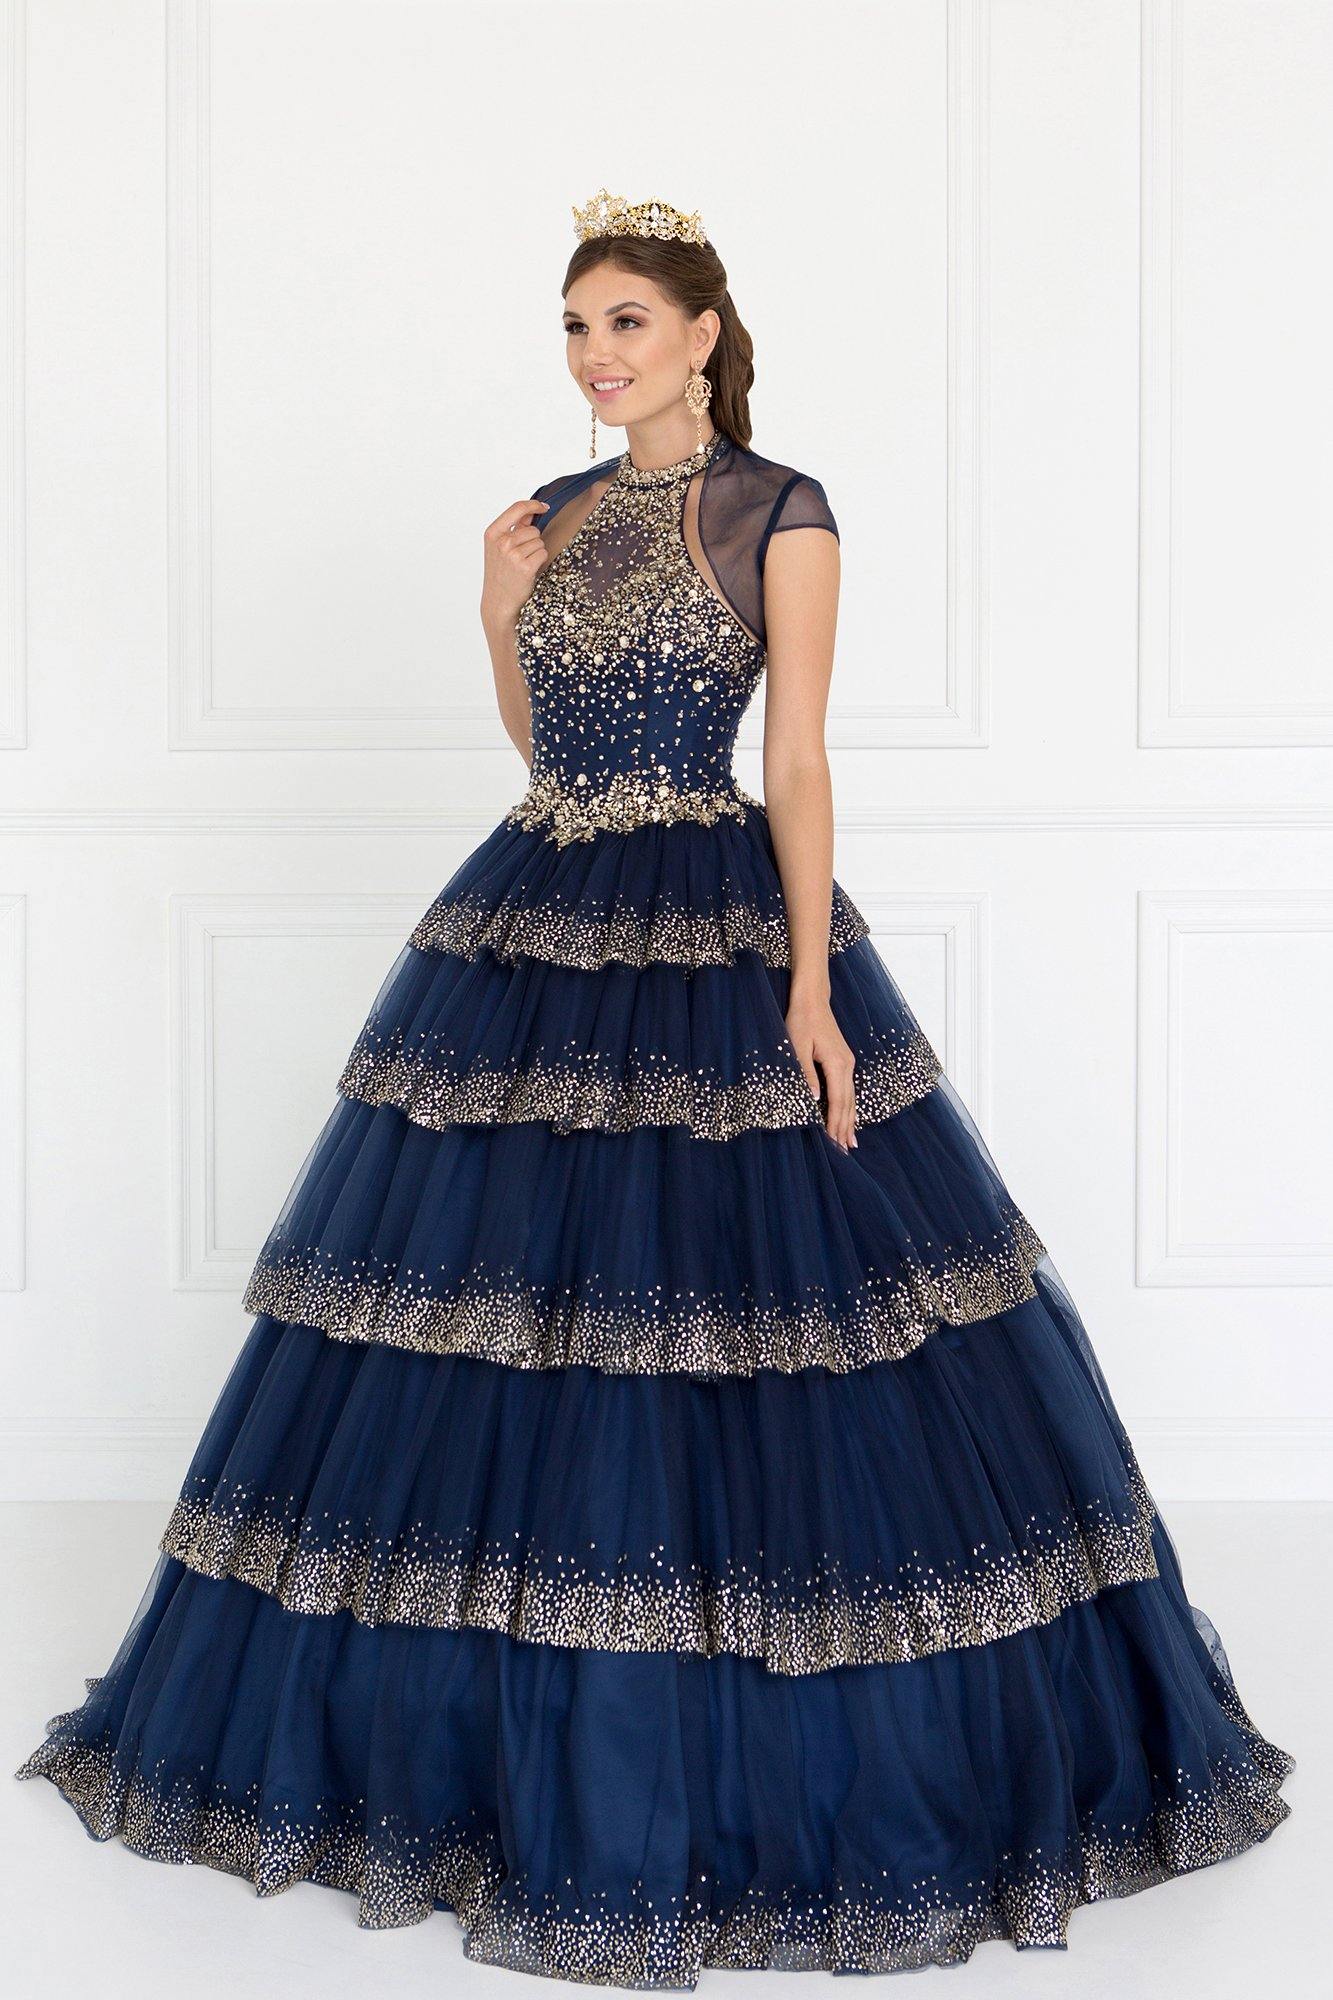 Layered Tulle Halter Quinceanera Dress with Jewels and Bolero - The Dress Outlet Elizabeth K